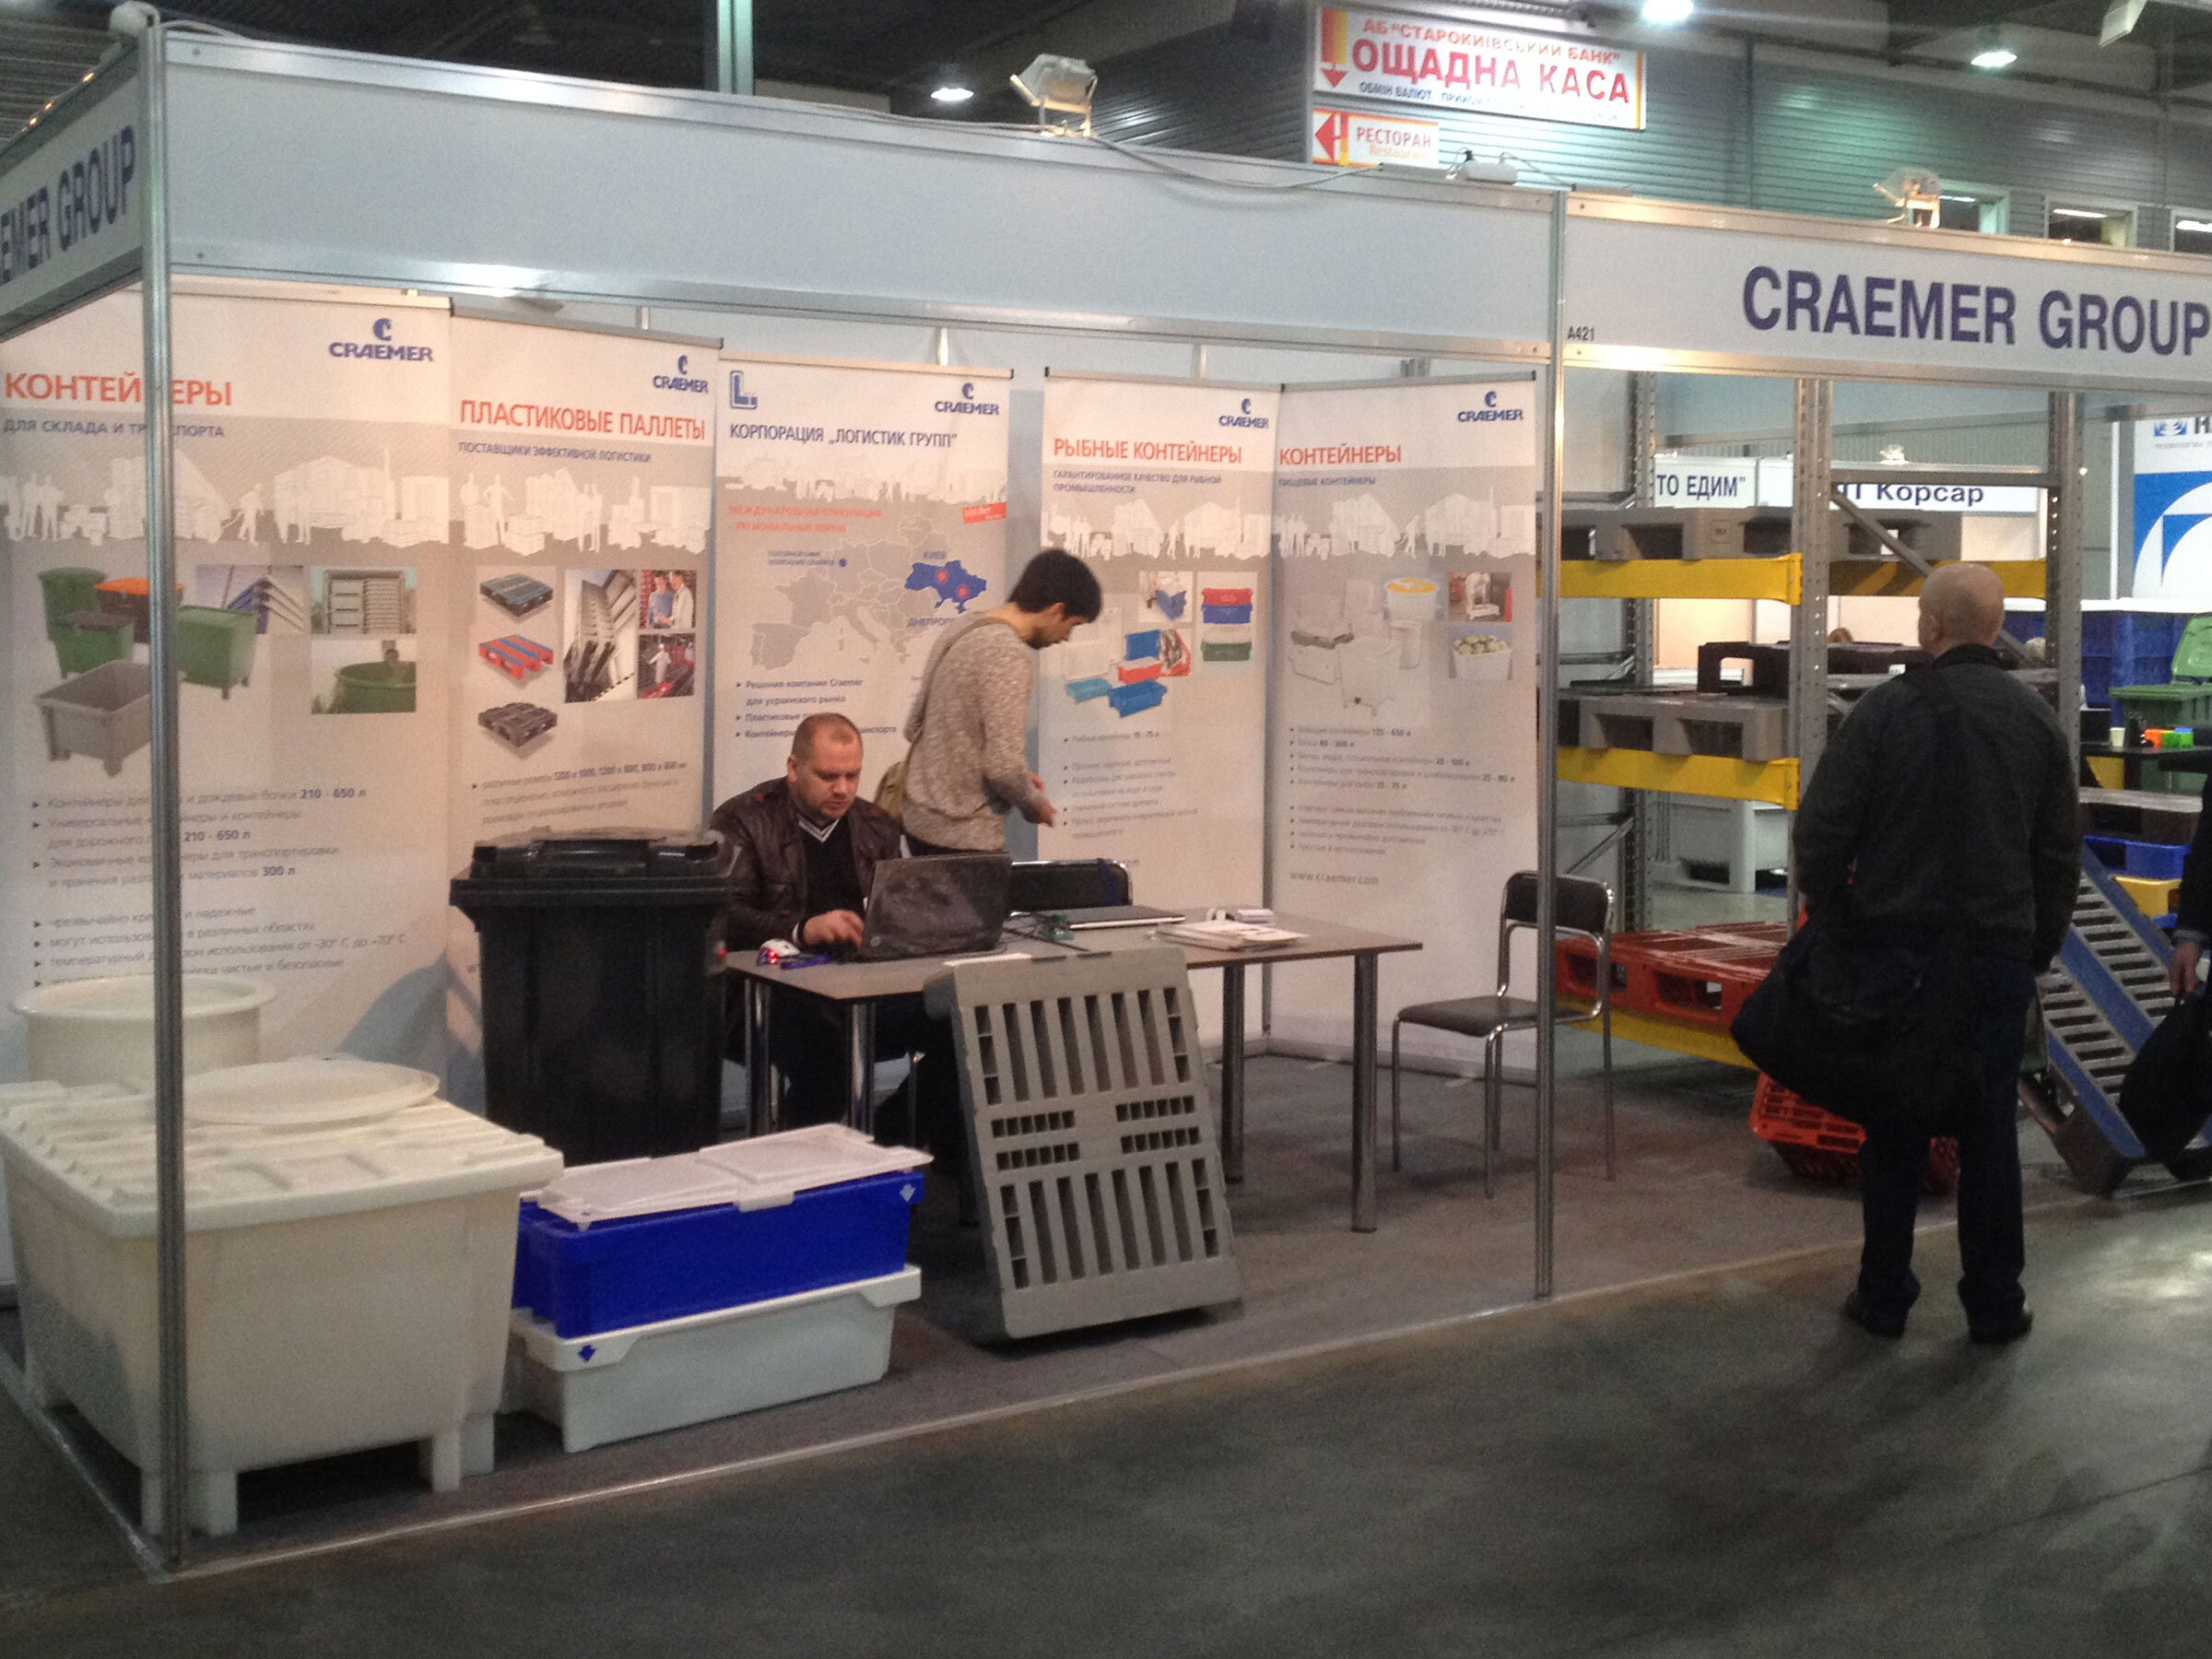 Craemer at exhibitions in Eastern and South Eastern Europe